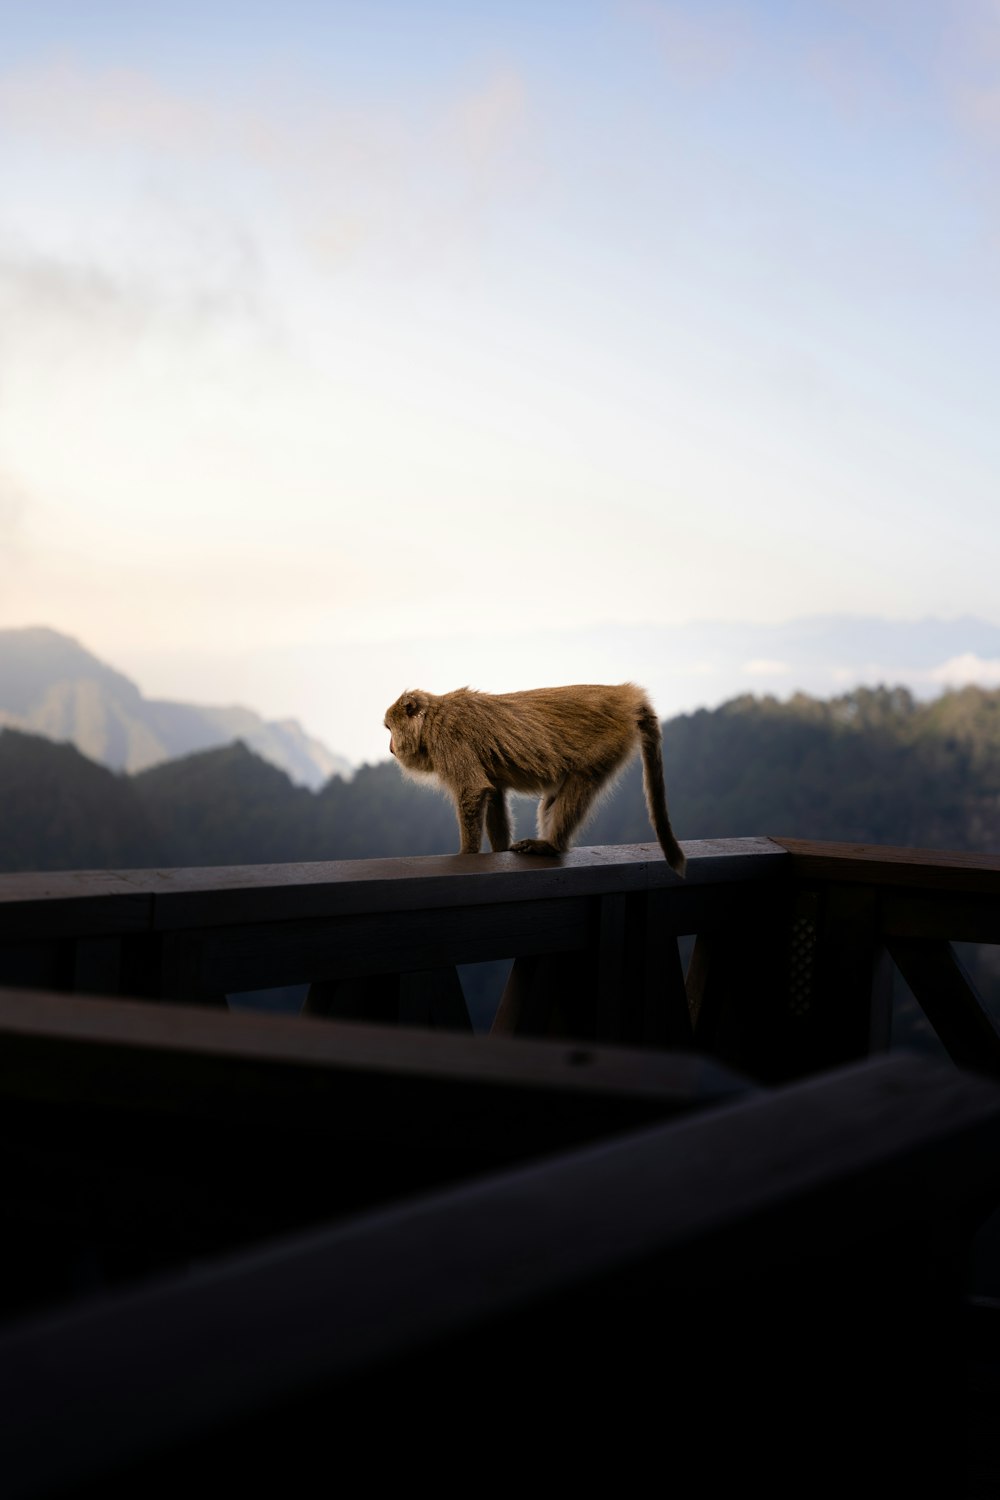 a monkey standing on top of a wooden fence